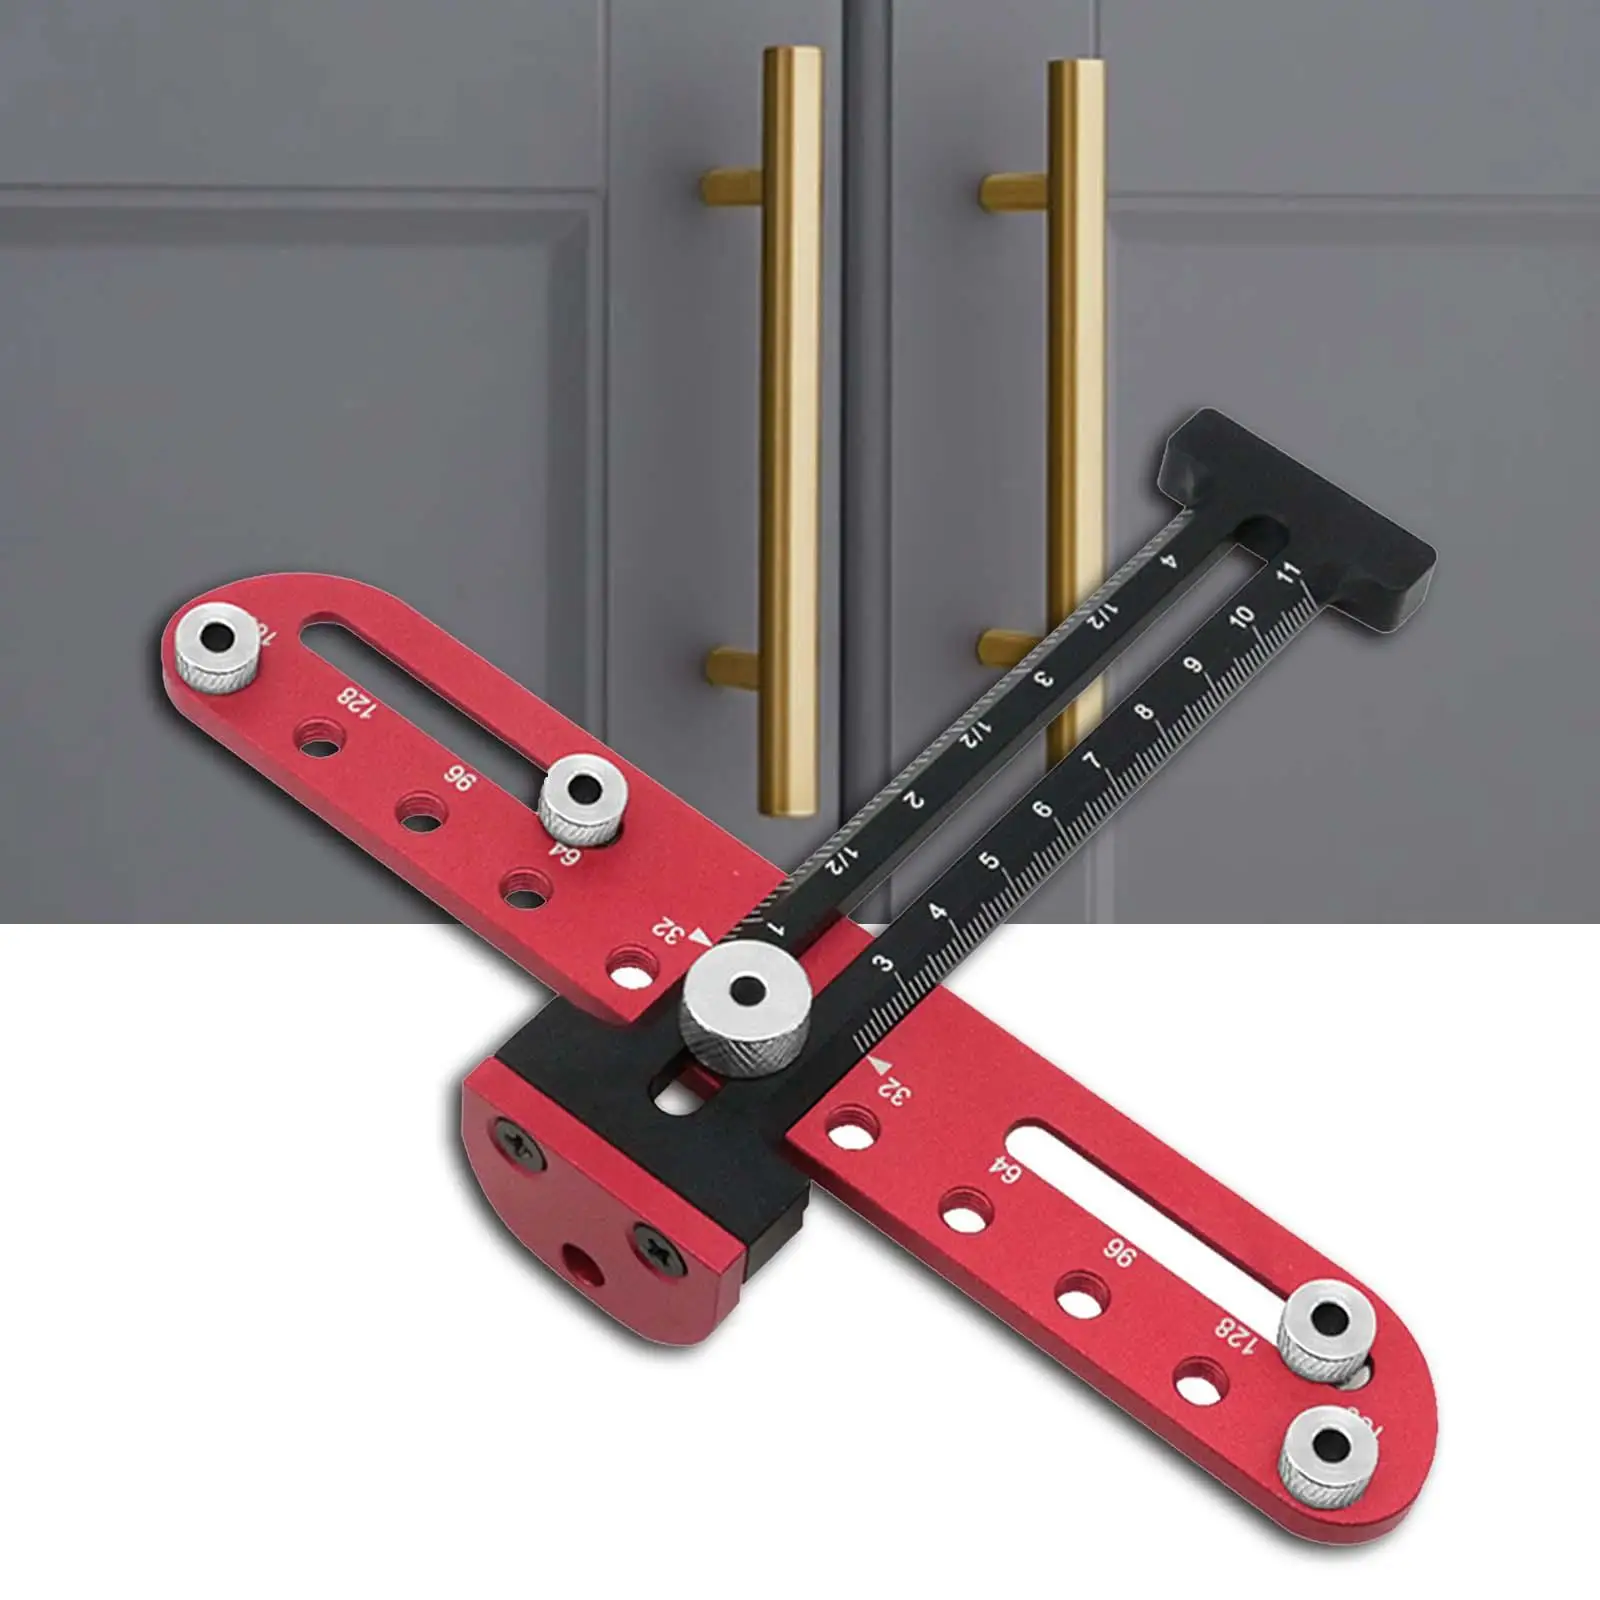 punch Template, Wardrobe Drill Guide Ruler Measure Tool Cabinet Hardware Jig Tool Adjustable Hole Punch ,